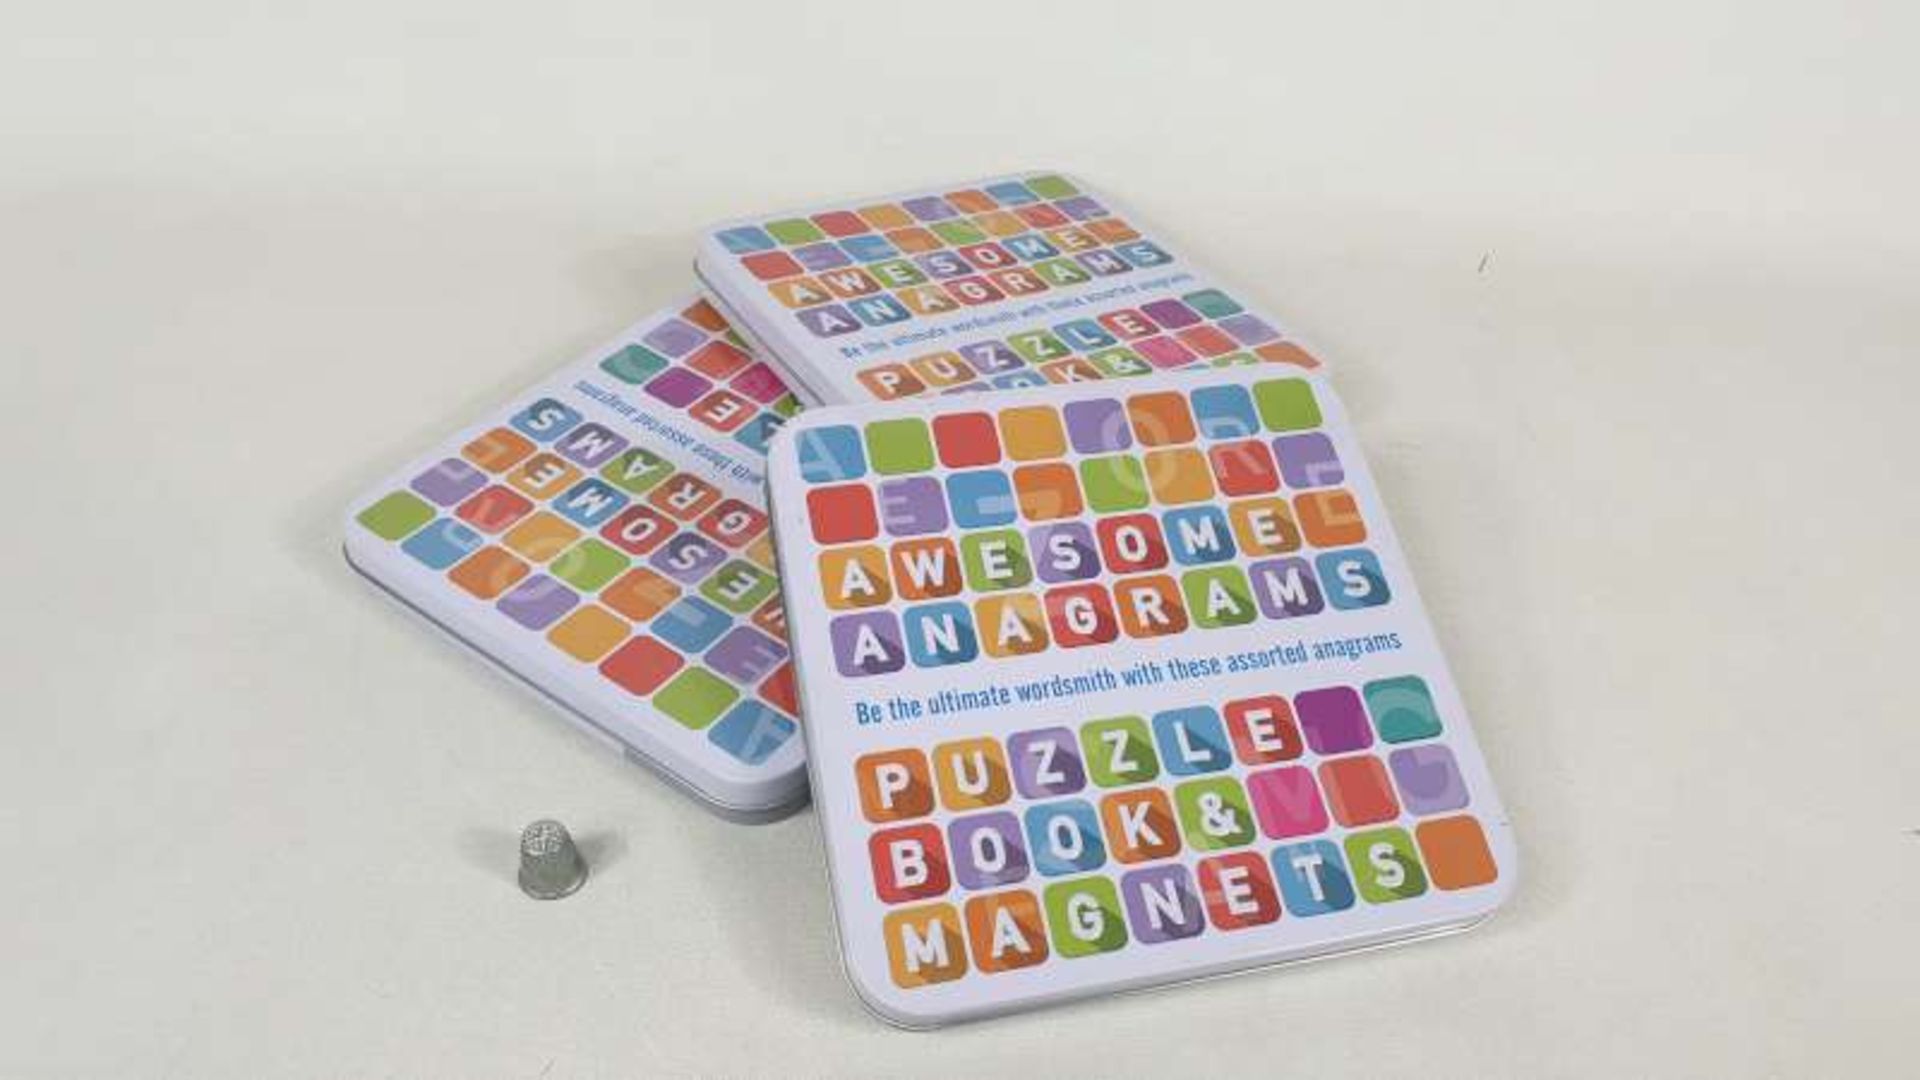 64 X AWESOME ANAGRAMS PUZZLE BOOK AND MAGNETS IN 4 BOXES